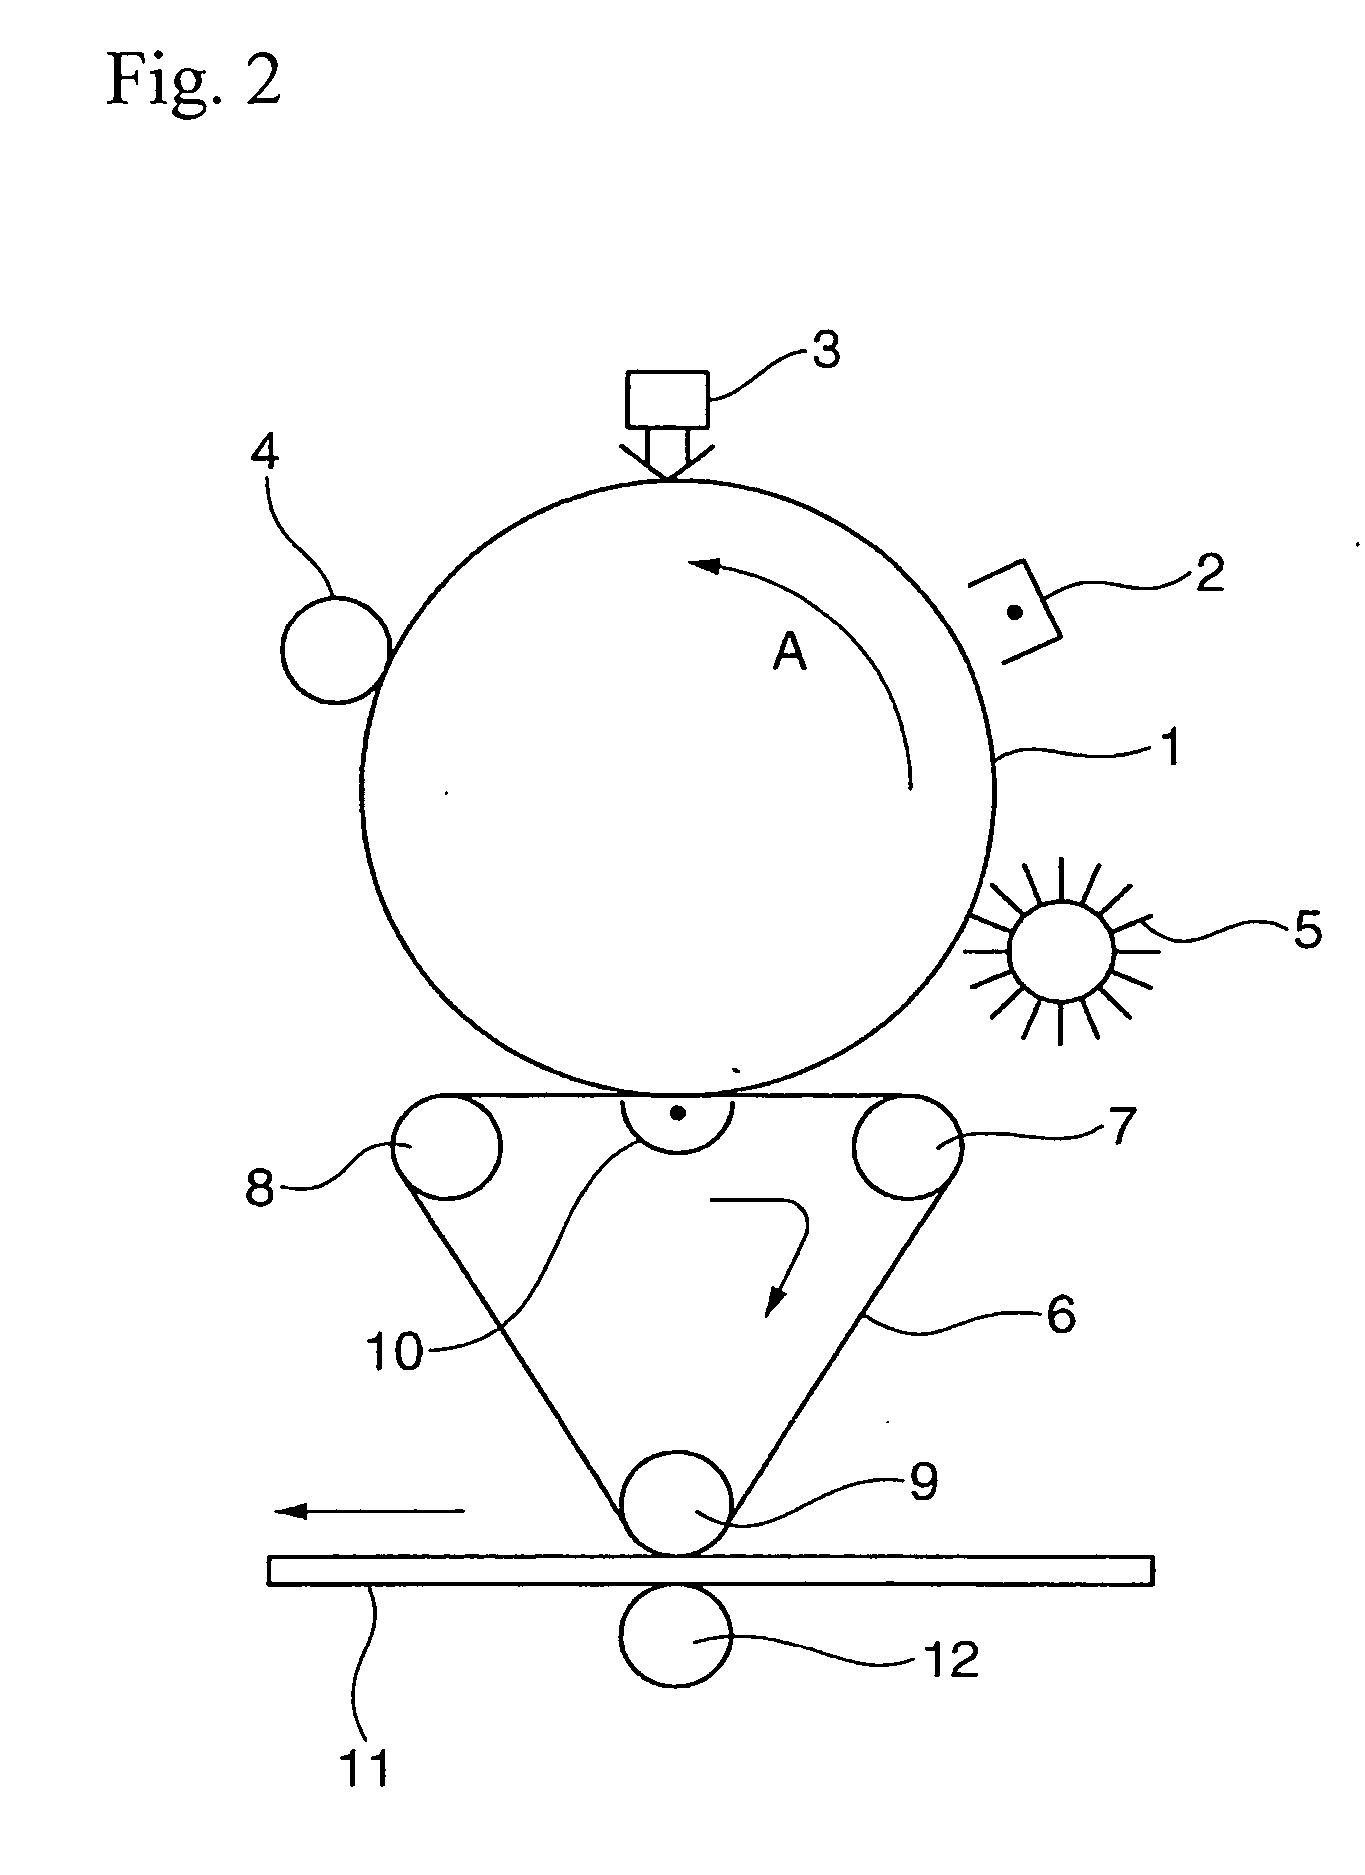 Endless belt for image-forming apparatuses, and image-forming apparatus